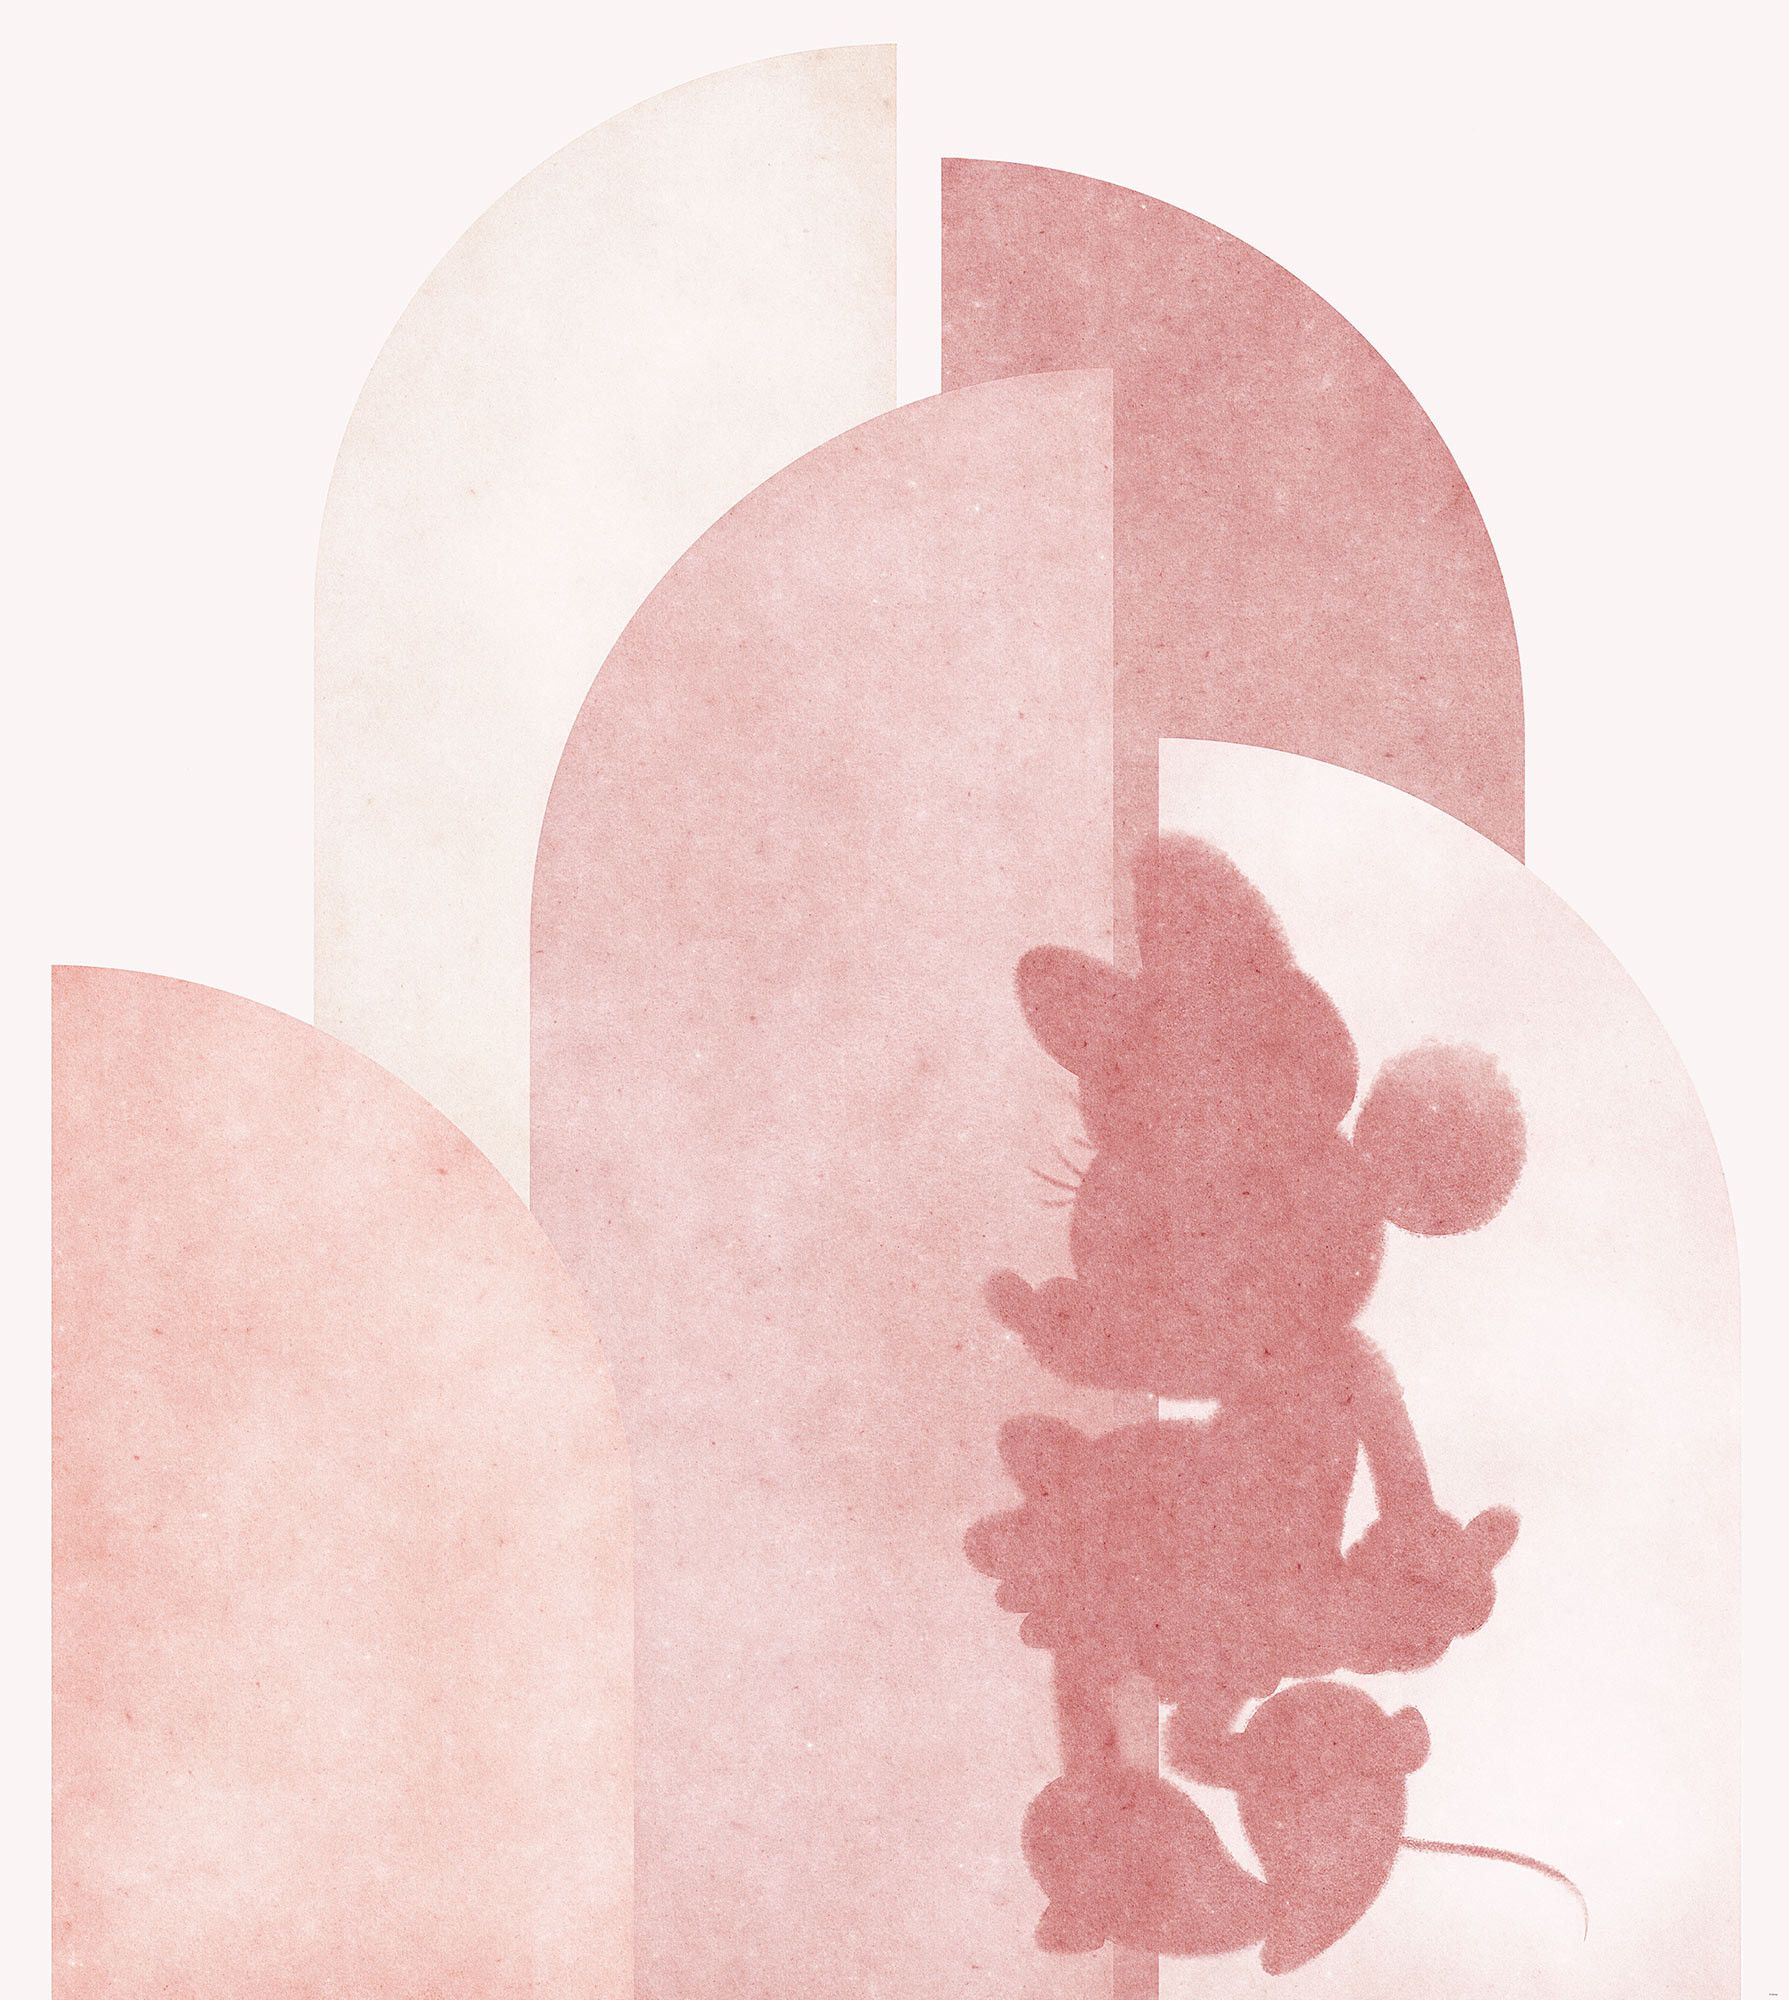 A silhouette of Minnie Mouse on a pink and white background - Minnie Mouse